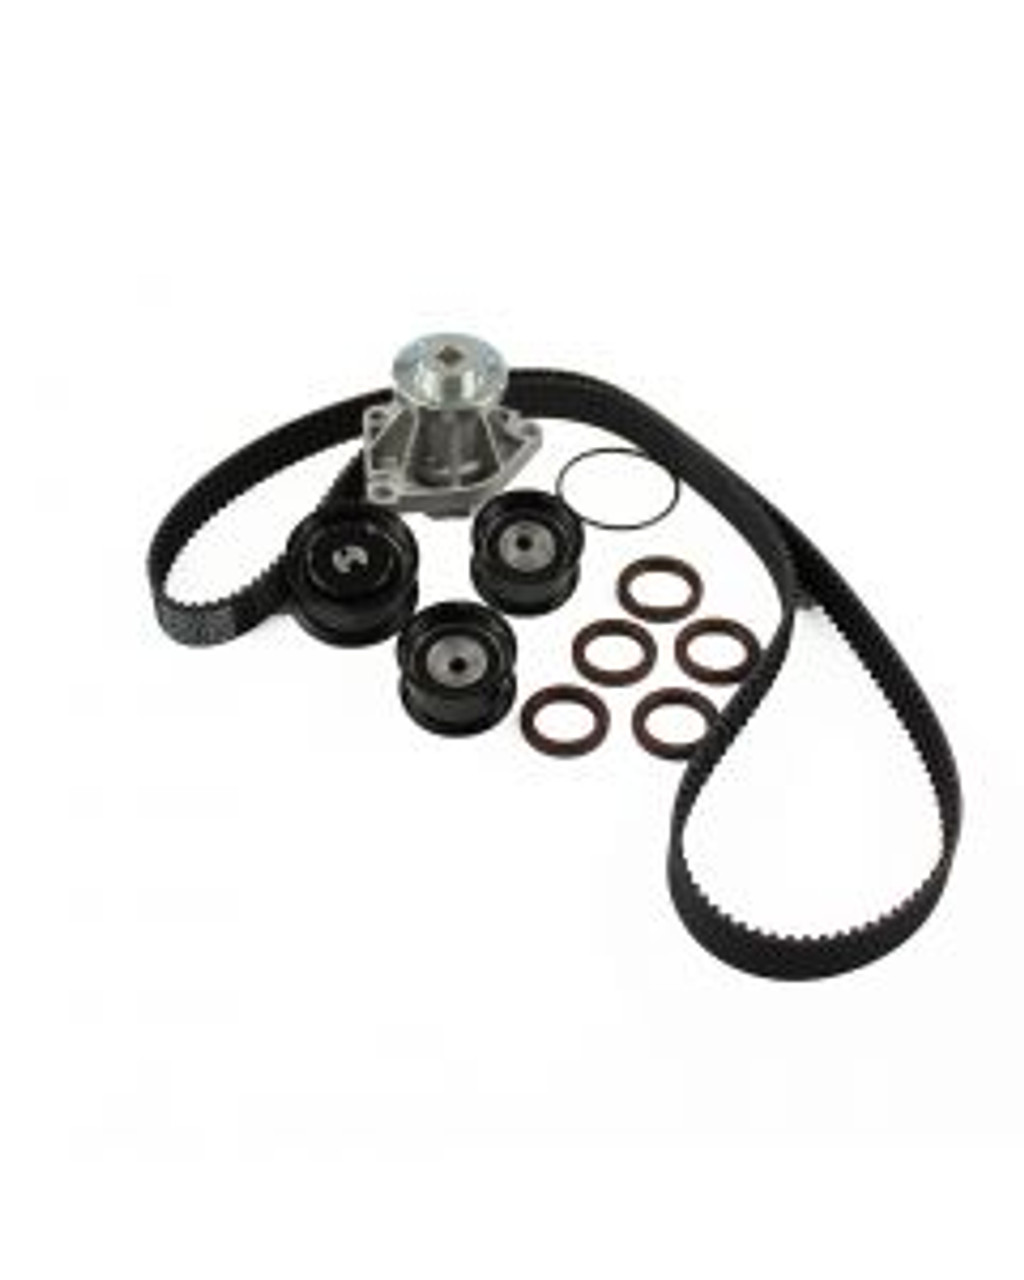 Timing Belt Kit with Water Pump 3.0L 2000 Saturn LW2 - TBK315WP.22